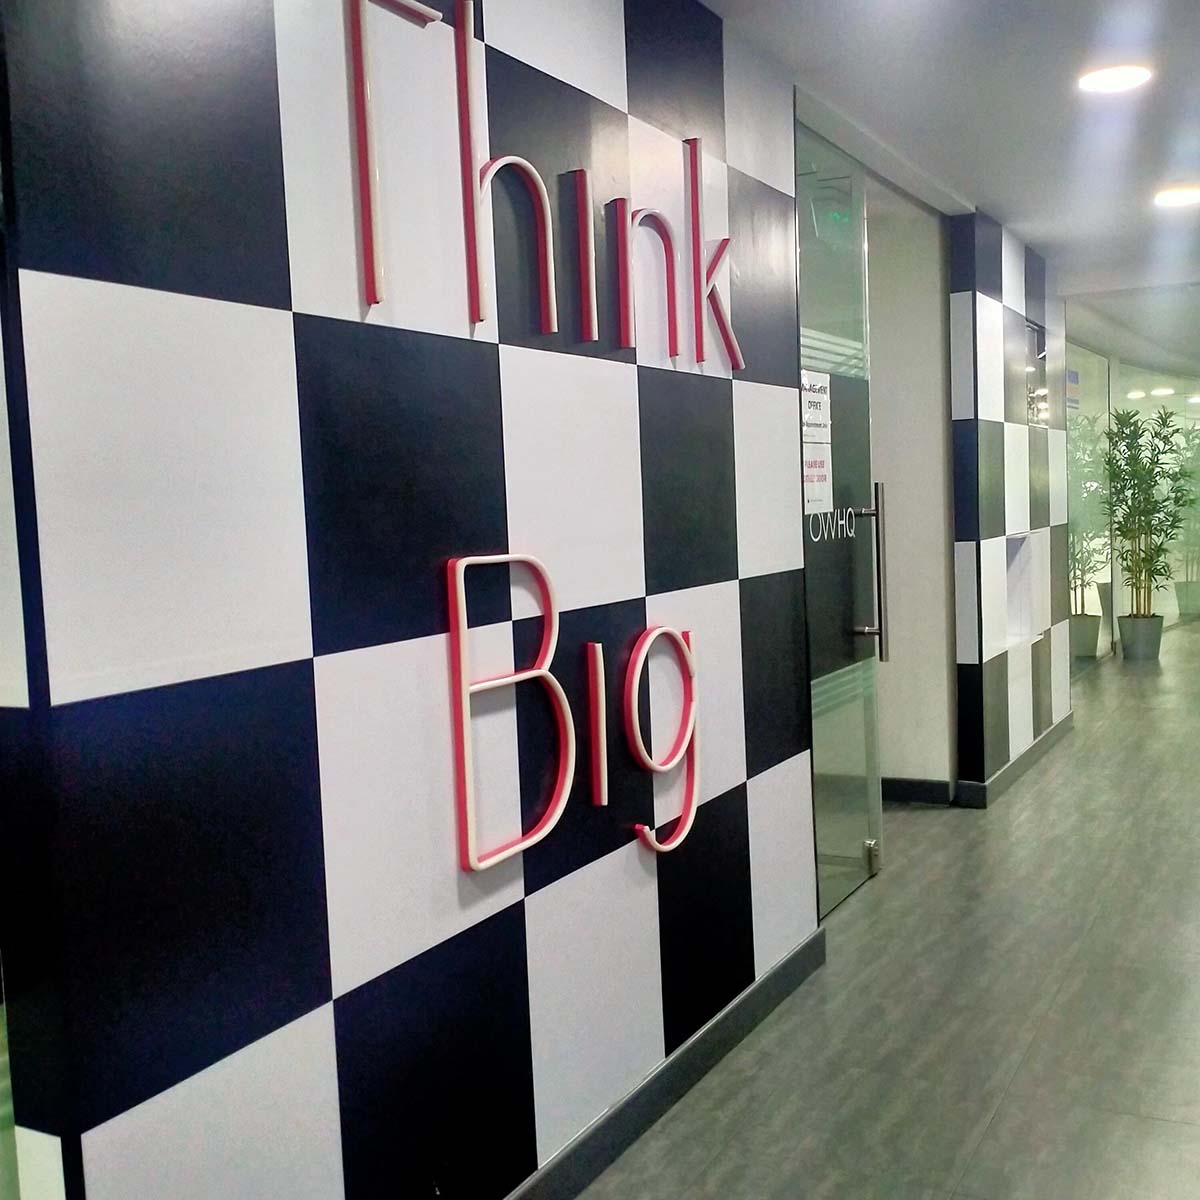 Dubai Office interior with wall signage on checks pattern design